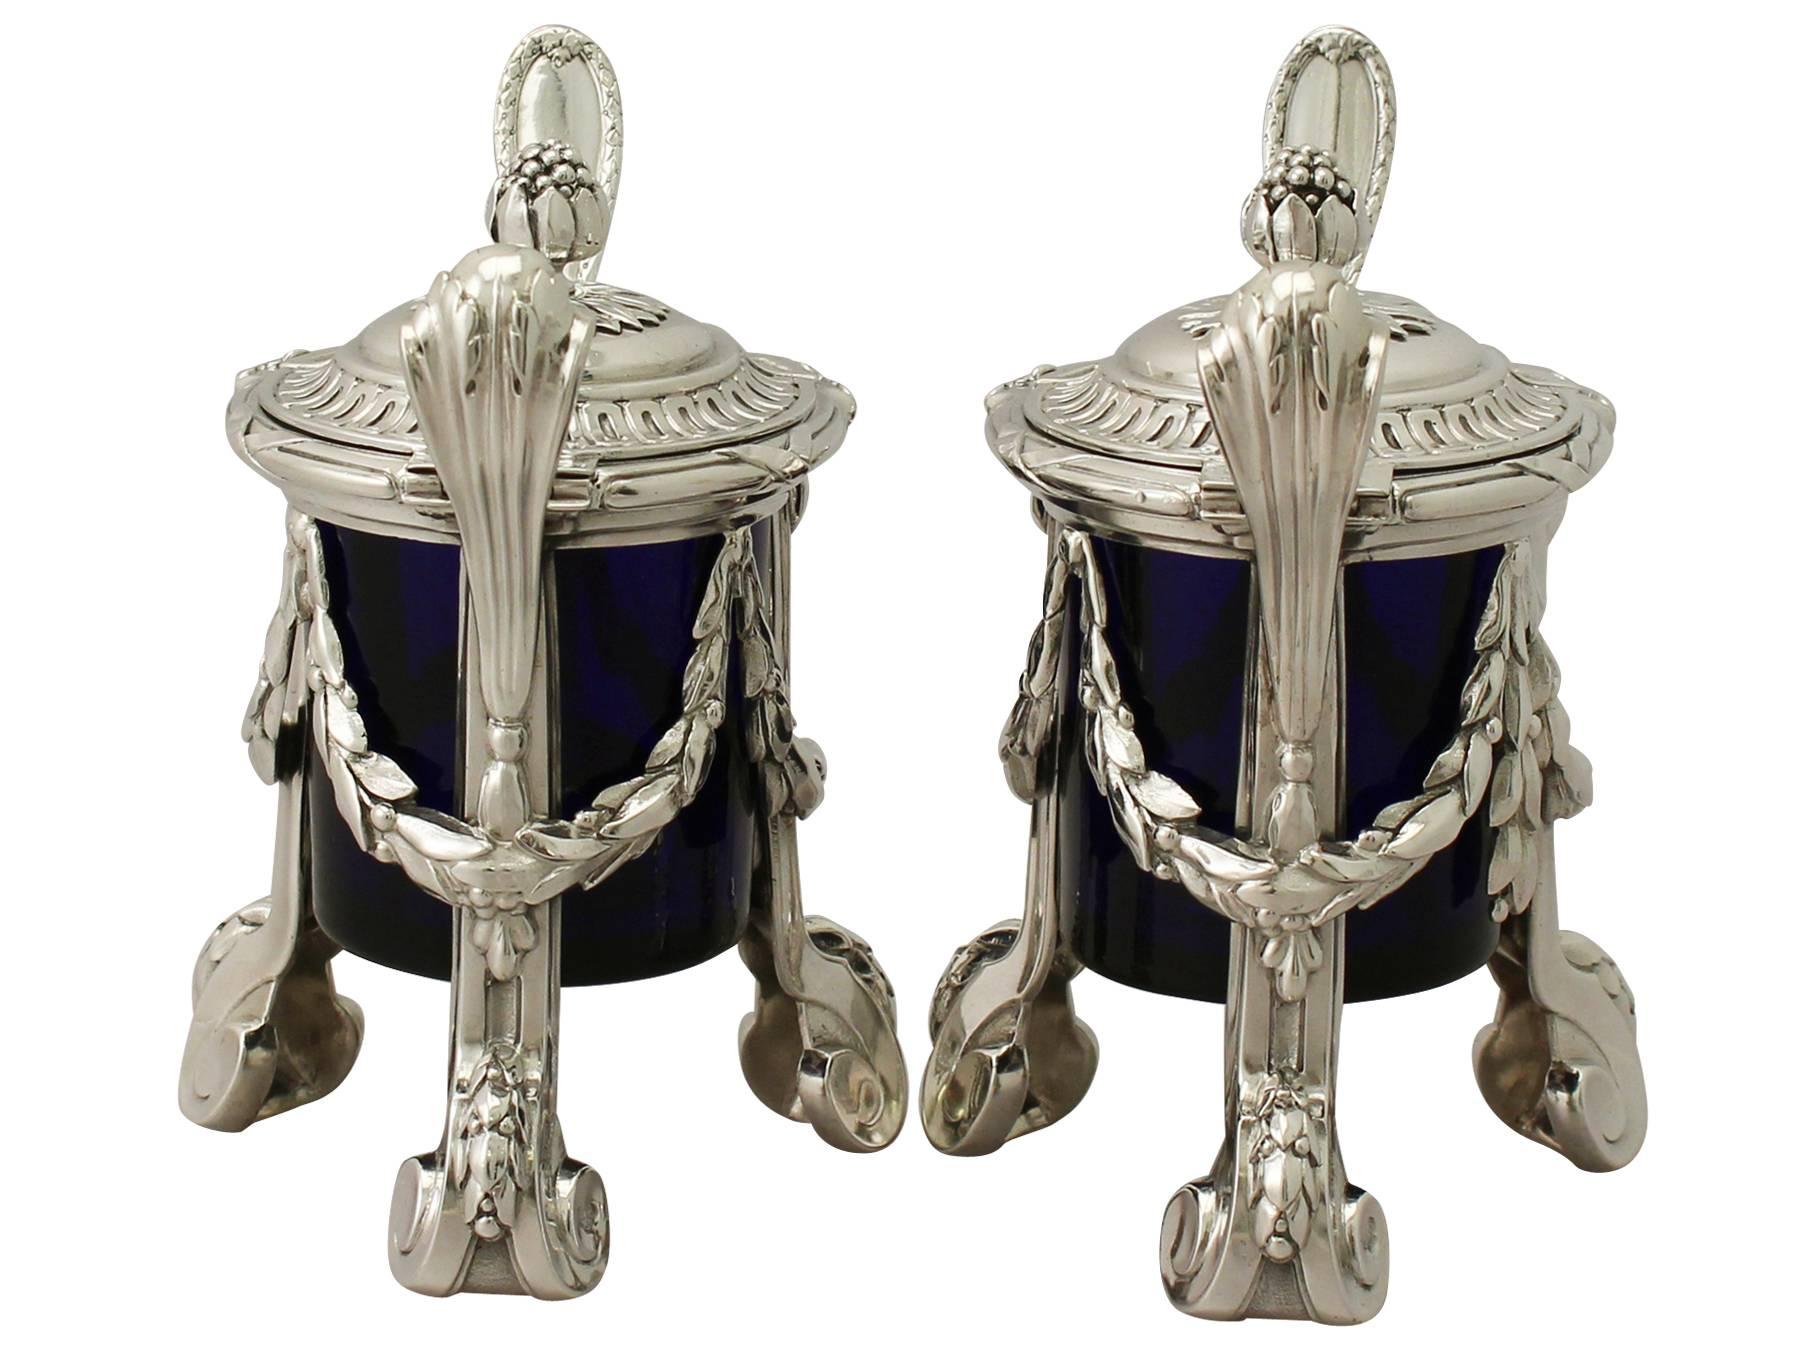 An exceptional, fine and impressive, unusual pair of antique George V English sterling silver mustard pots made in the Regency style; an addition to our silver cruet and condiments collection

These exceptional antique George V sterling silver